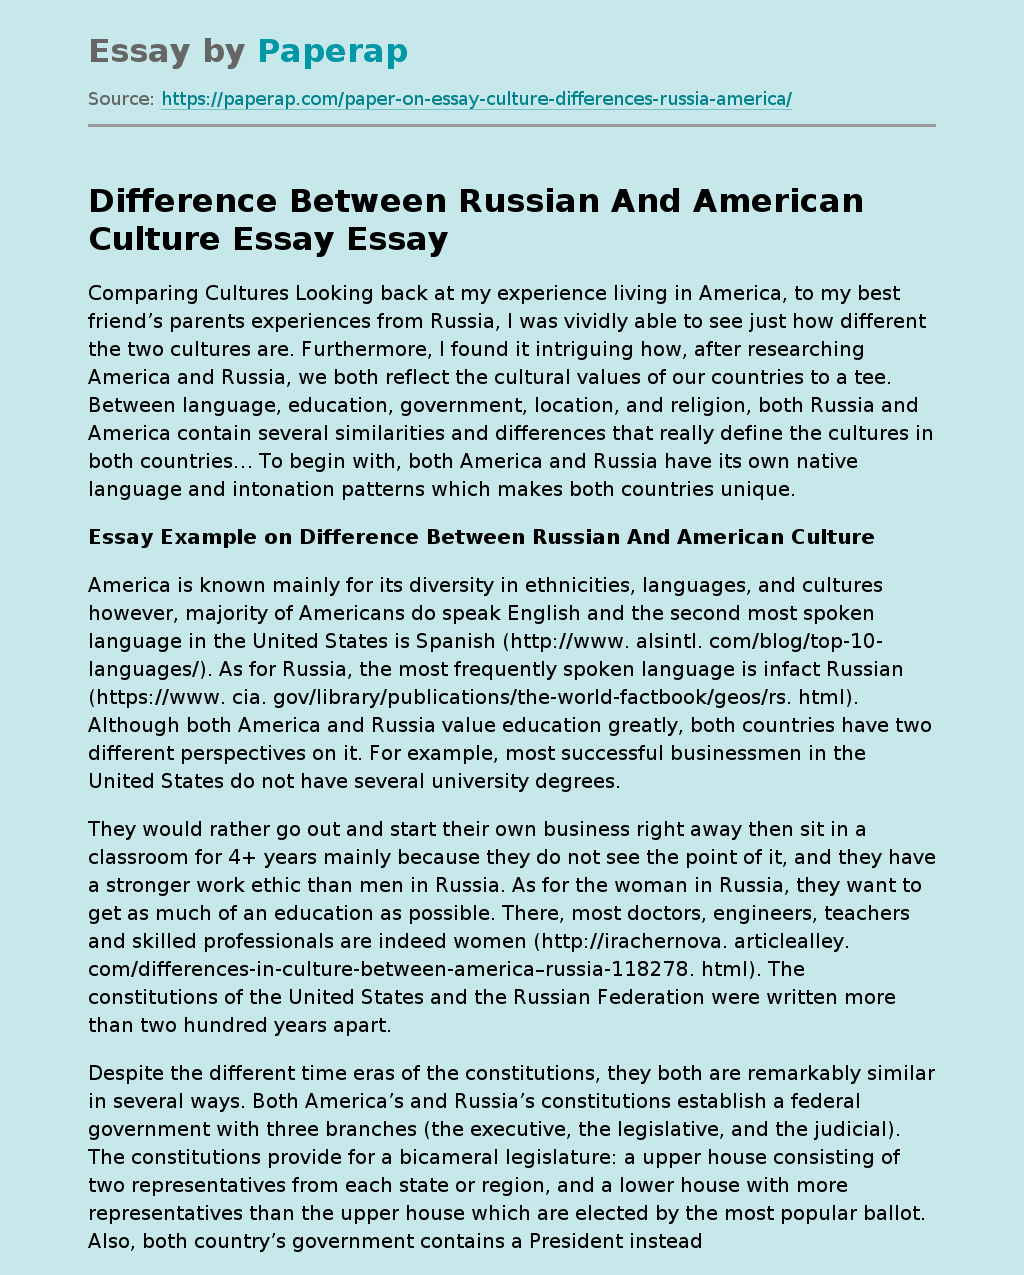 Difference Between Russian And American Culture Essay